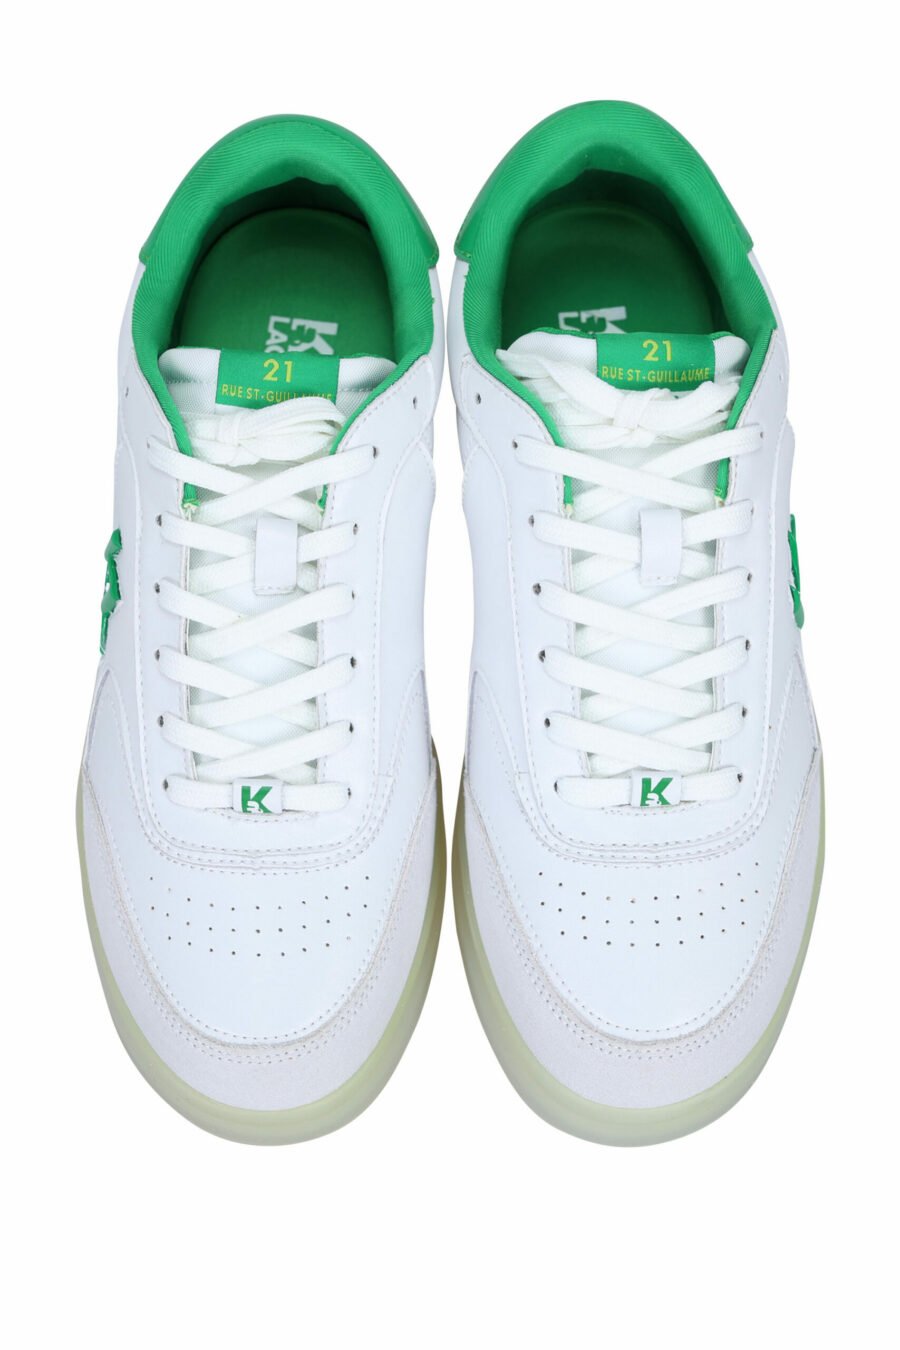 White and grey "brink" trainers with green details - 5059529294495 4 scaled